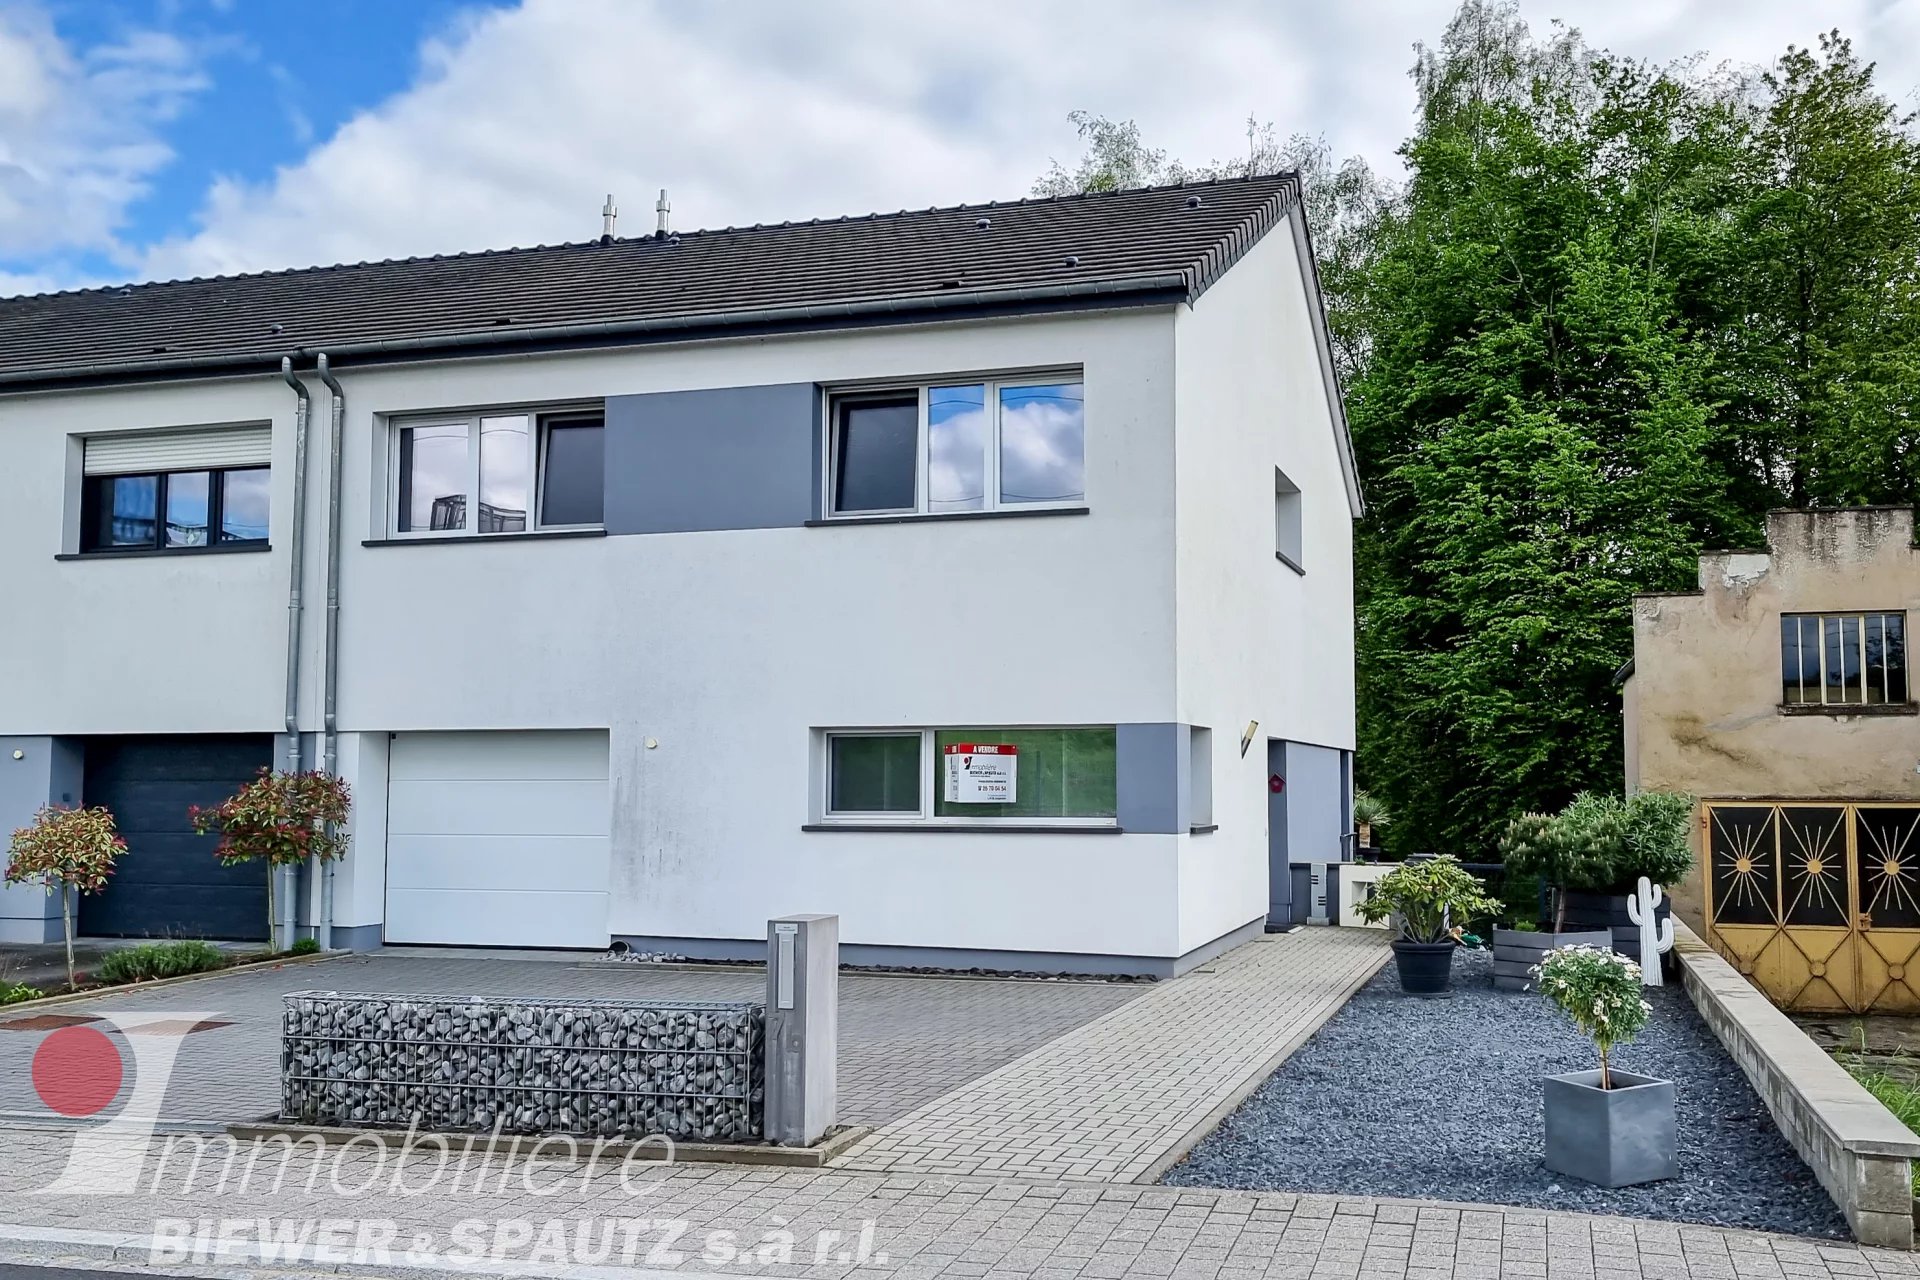 FOR SALE - 4 bedroom semi-detached house in Wecker